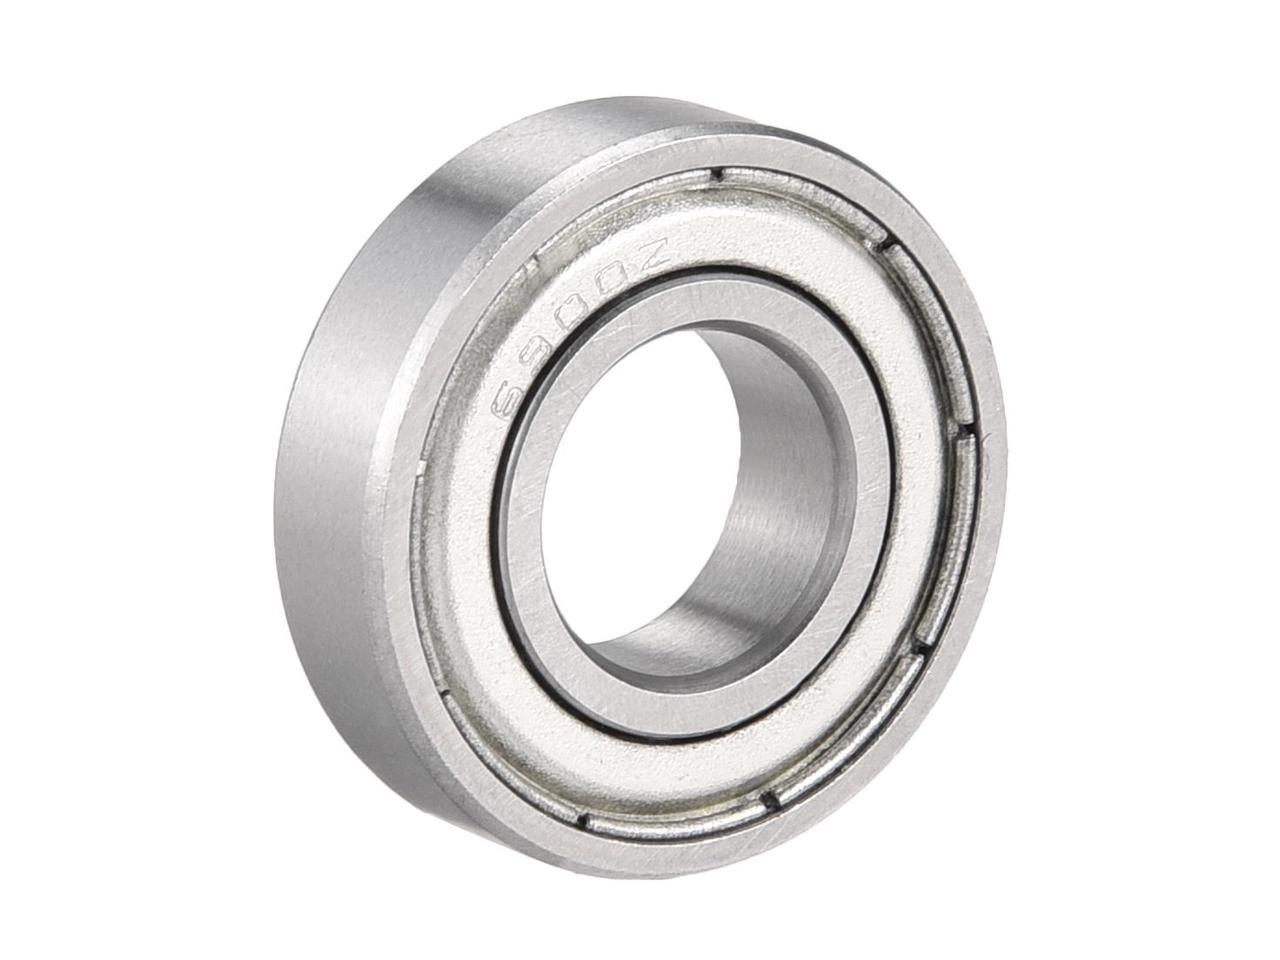 6900ZZ Deep Groove Ball Bearings with Double Shield 6900-2Z 1080900 10 mm x 22 mm x 6 mm Carbon Steel Bearings Pack of 2